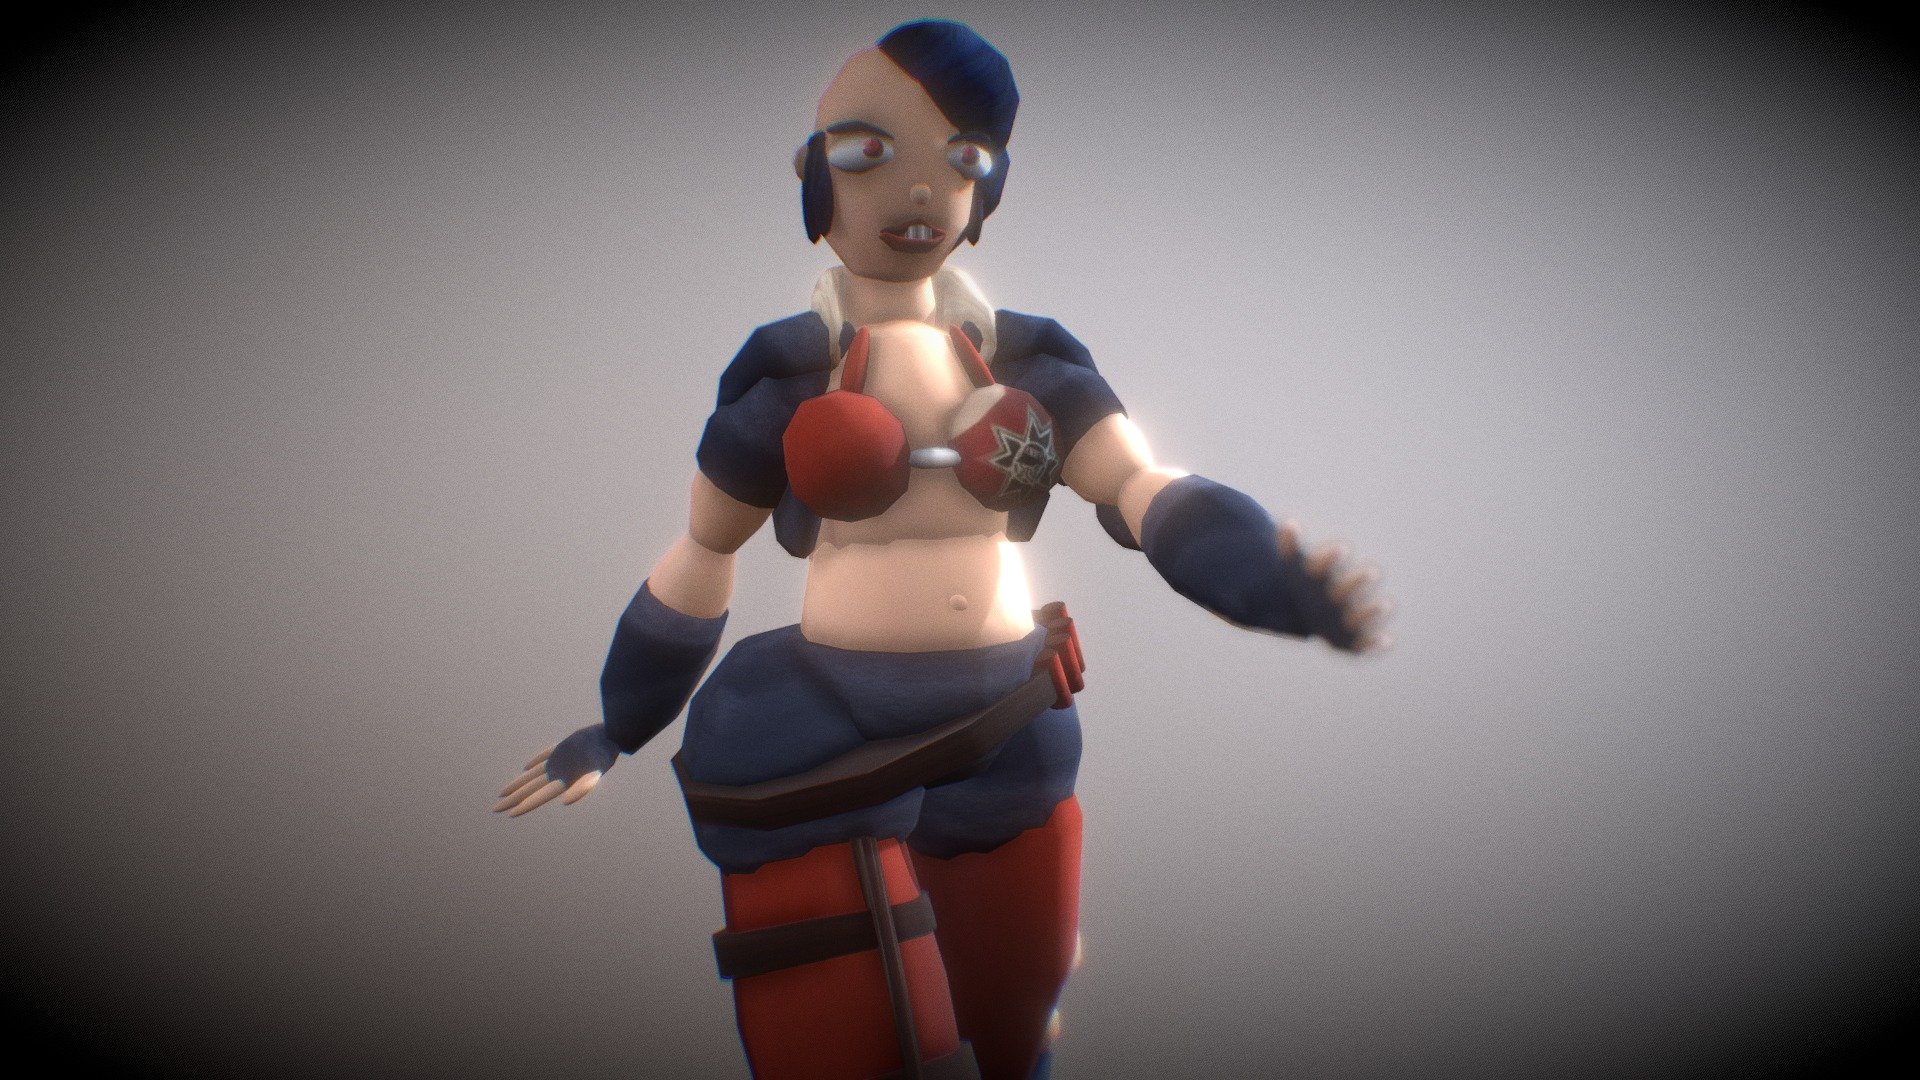 Alicia Fan Made Character From Spacelords